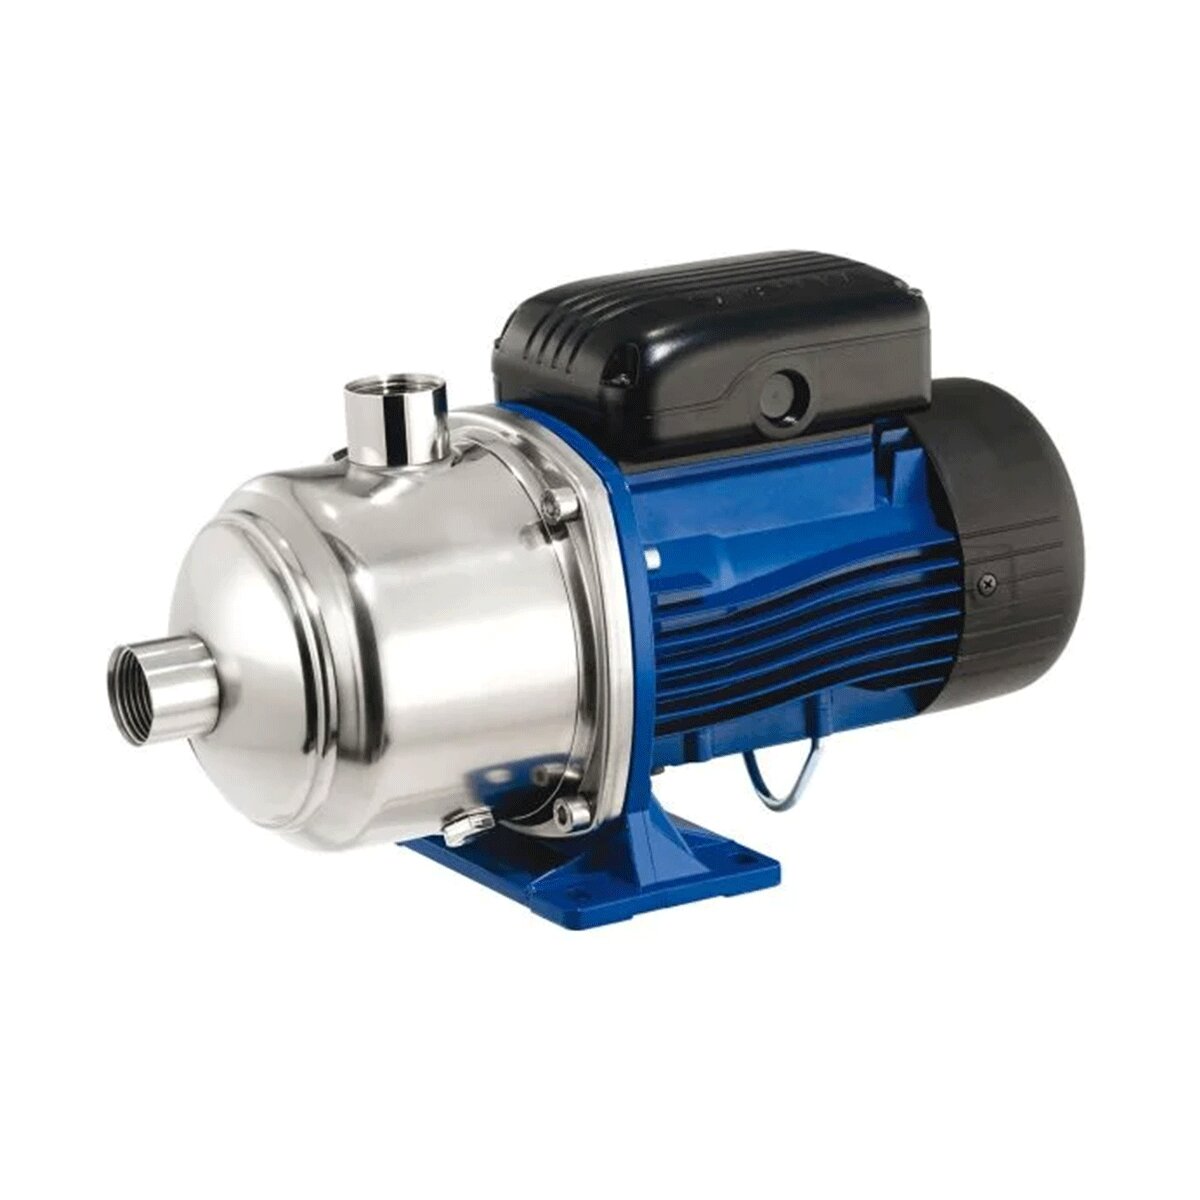 Lowara 3HM04 series multistage centrifugal surface pump IE2